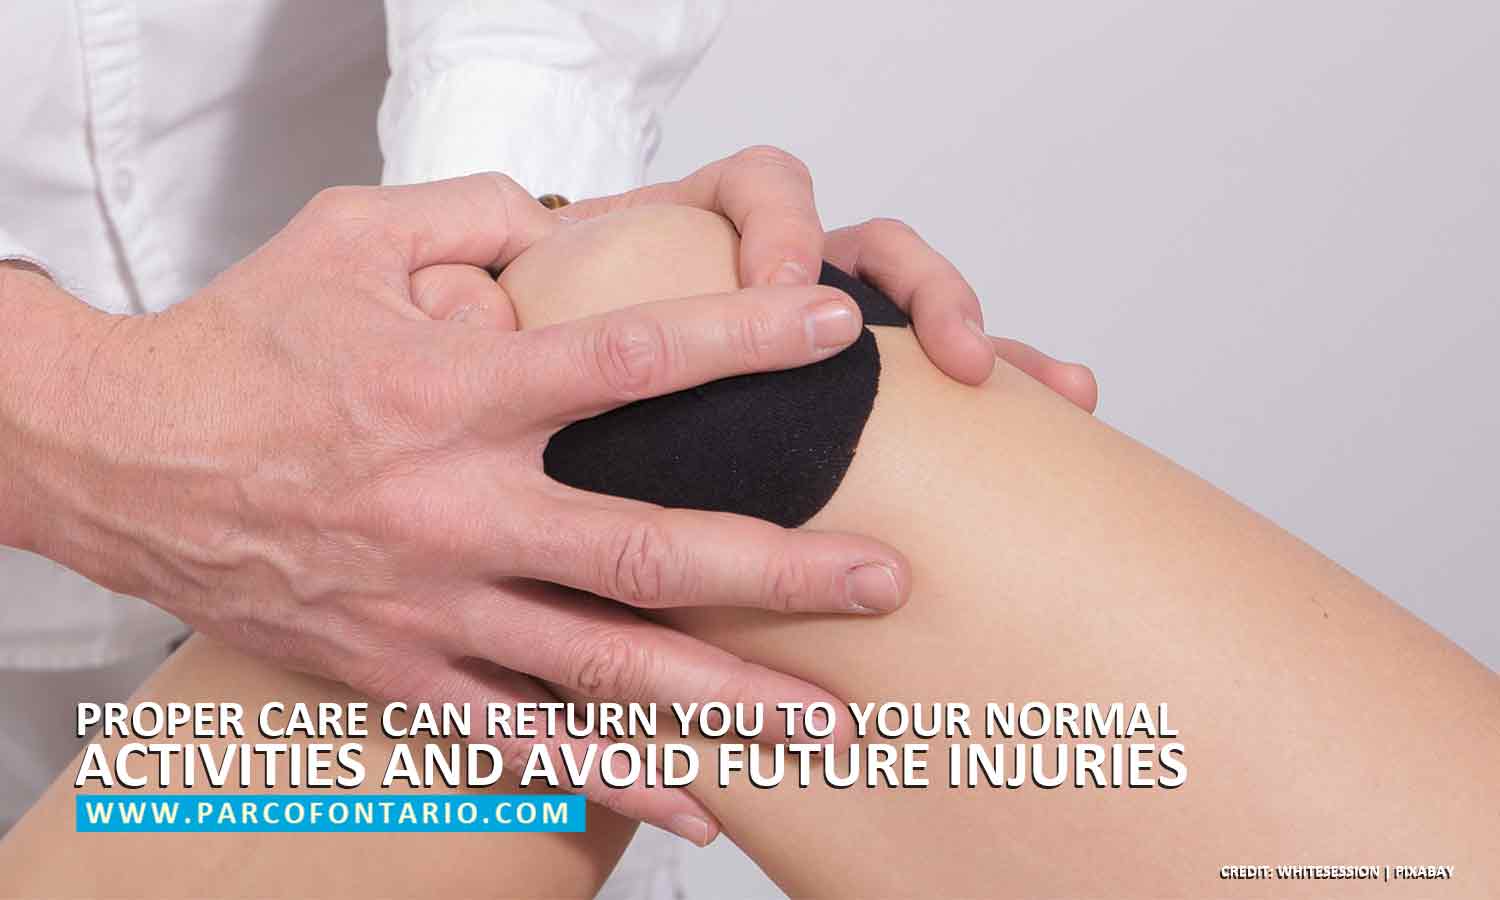 Proper care can return you to your normal activities